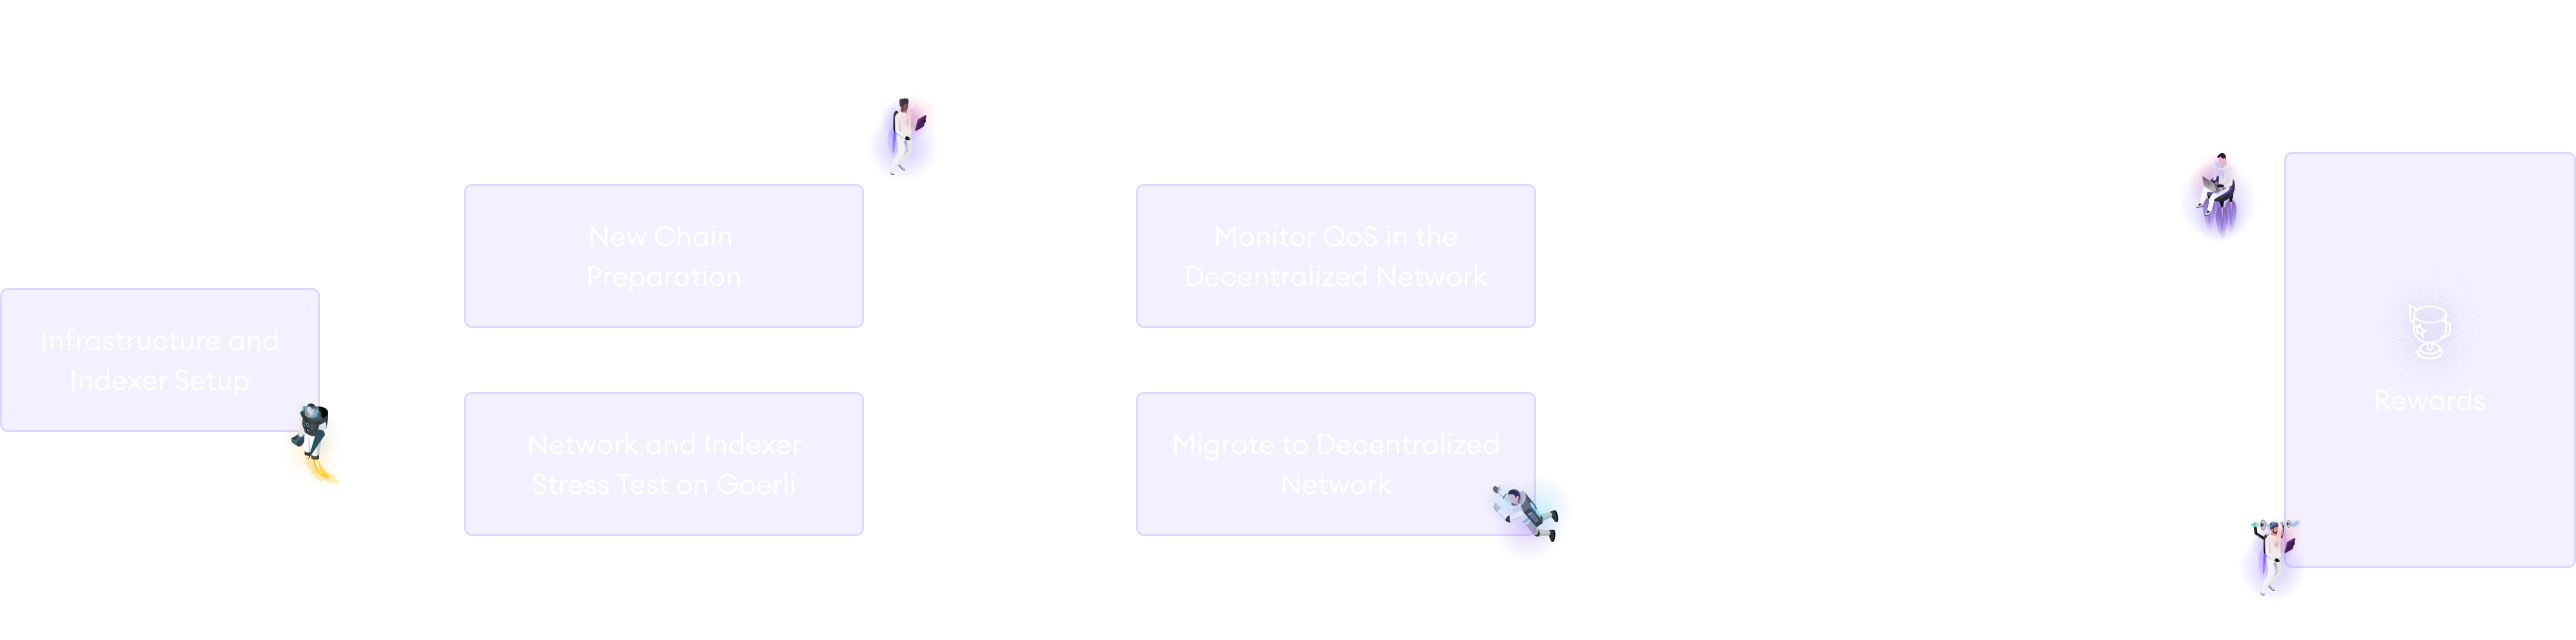 Indexer journey: from testnet to decentralized network